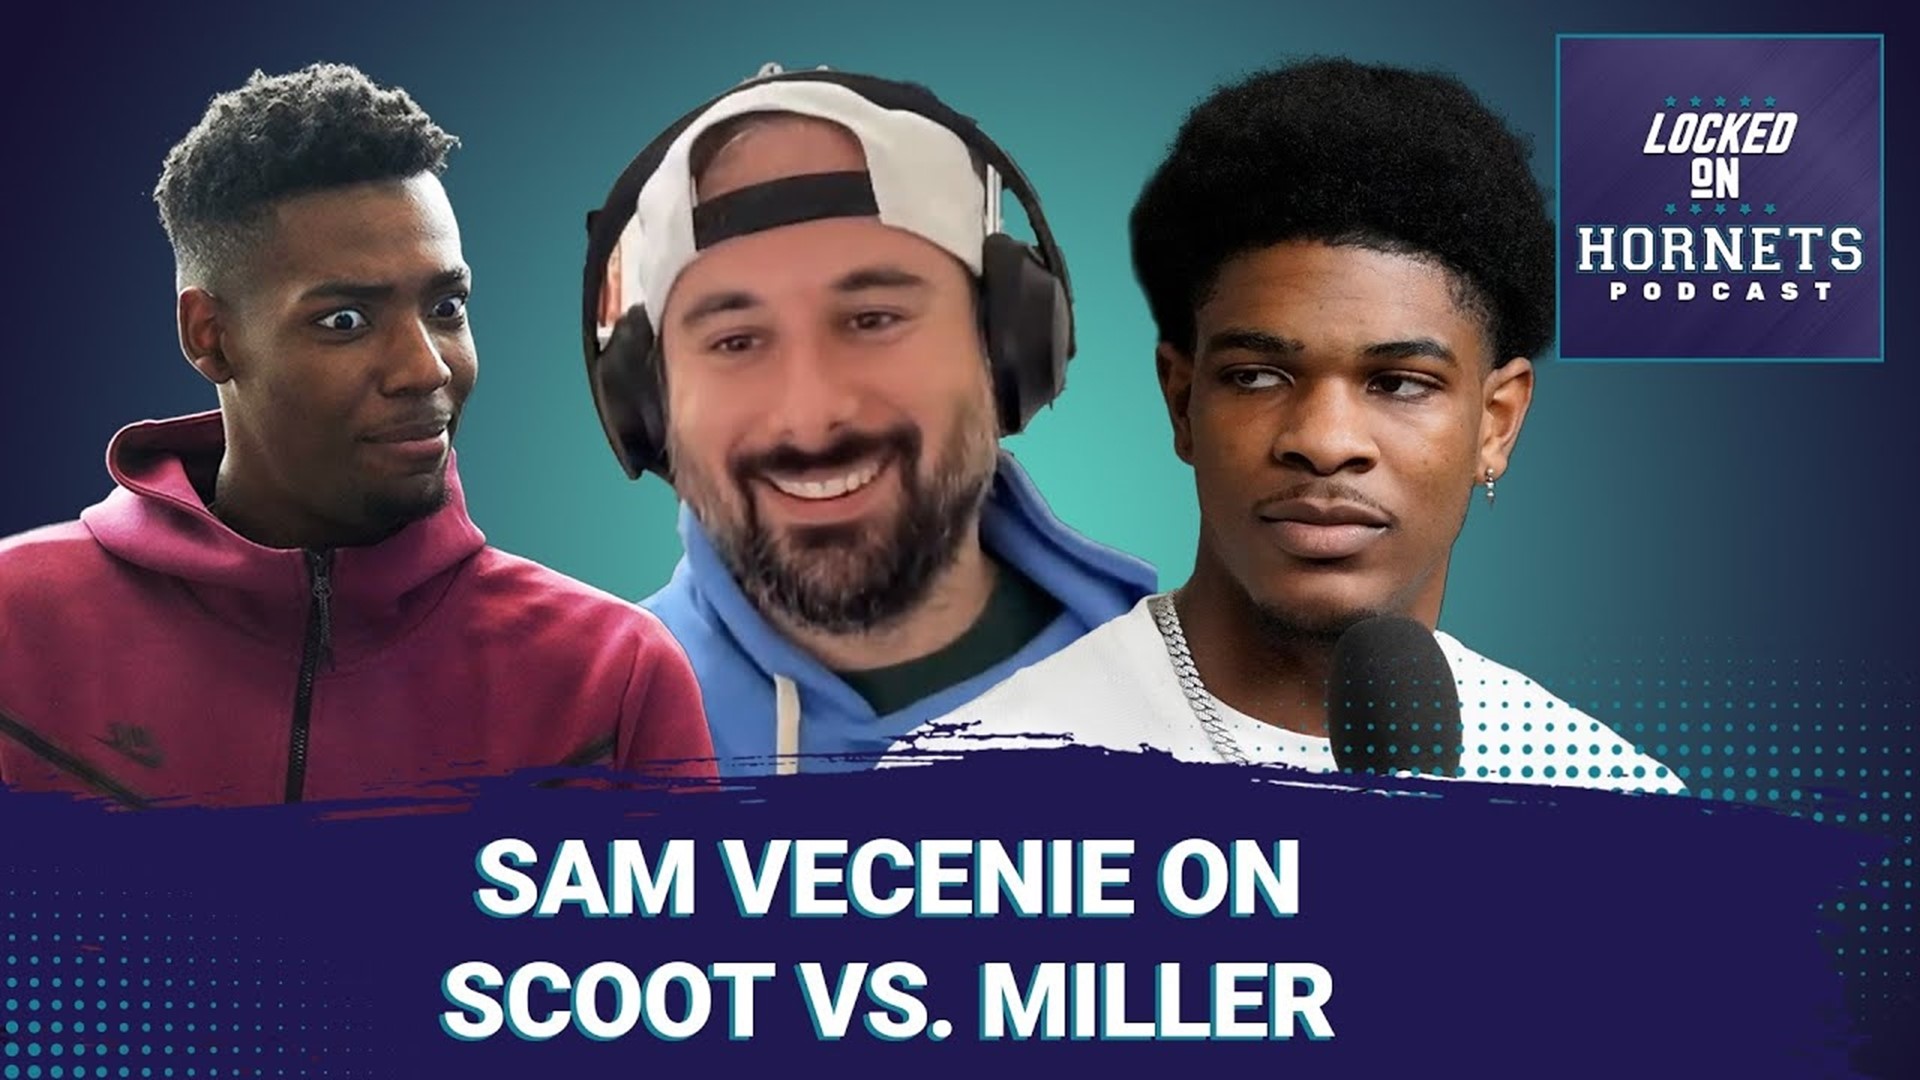 Sam Vecenie from The Athletic joins the pod to discuss the Hornets big decision at number 2 in the NBA draft. Is it the clear choice to take Scoot?